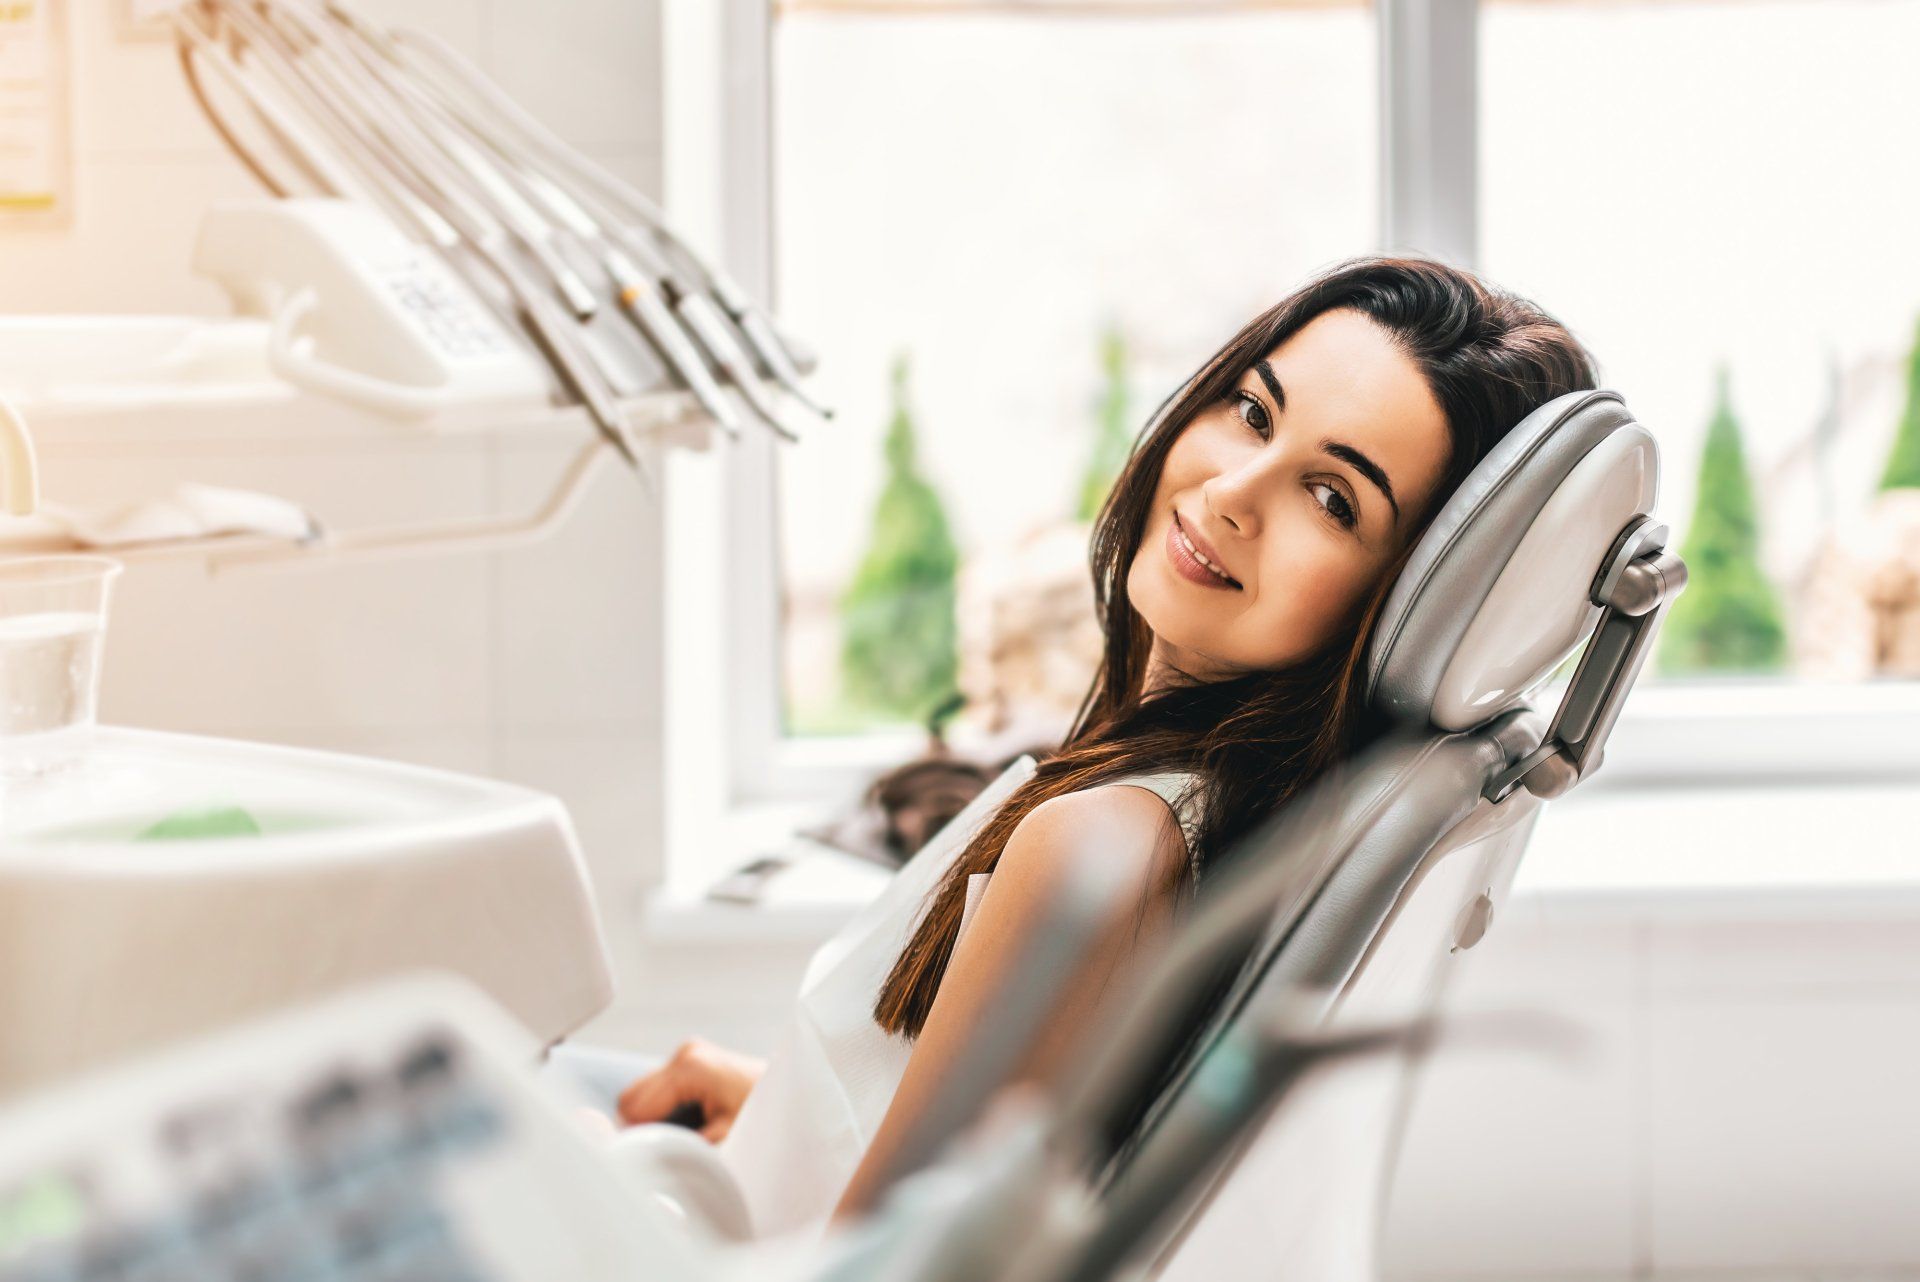 A woman is sitting in a dental chair and smiling.